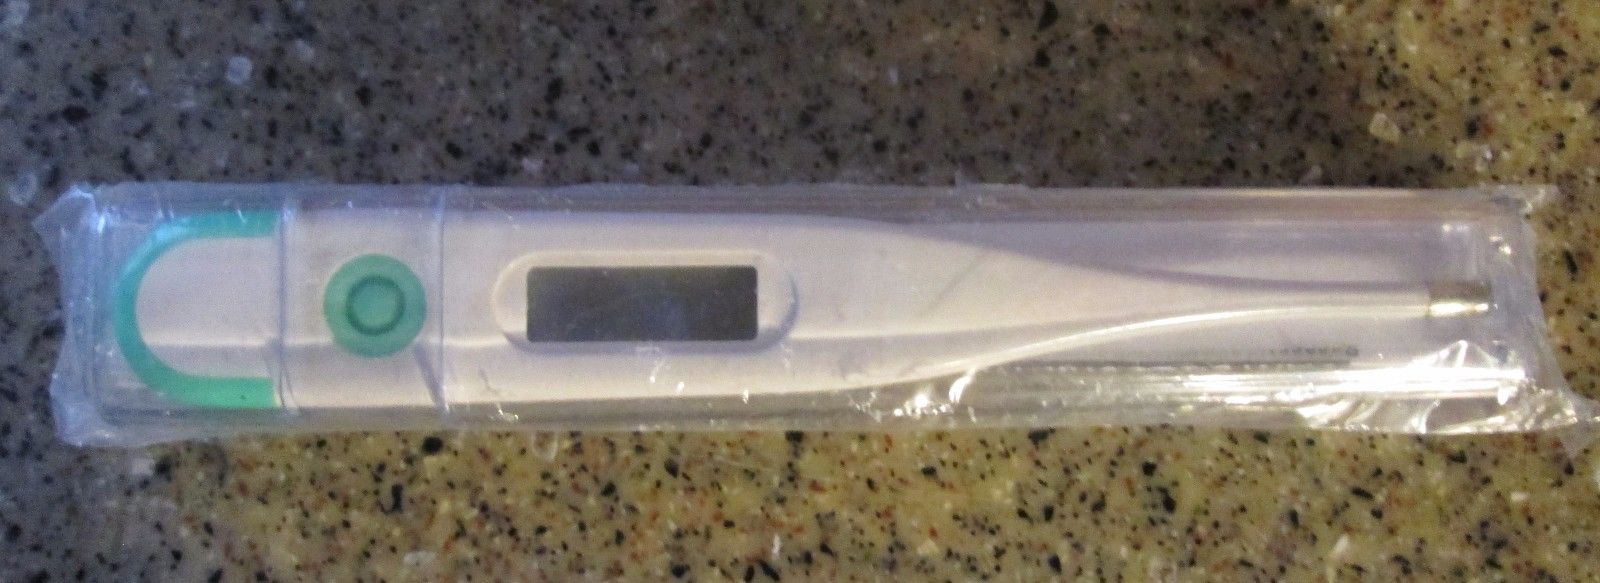 Adult Child Thermometer Oral Digital Temperature New in Package